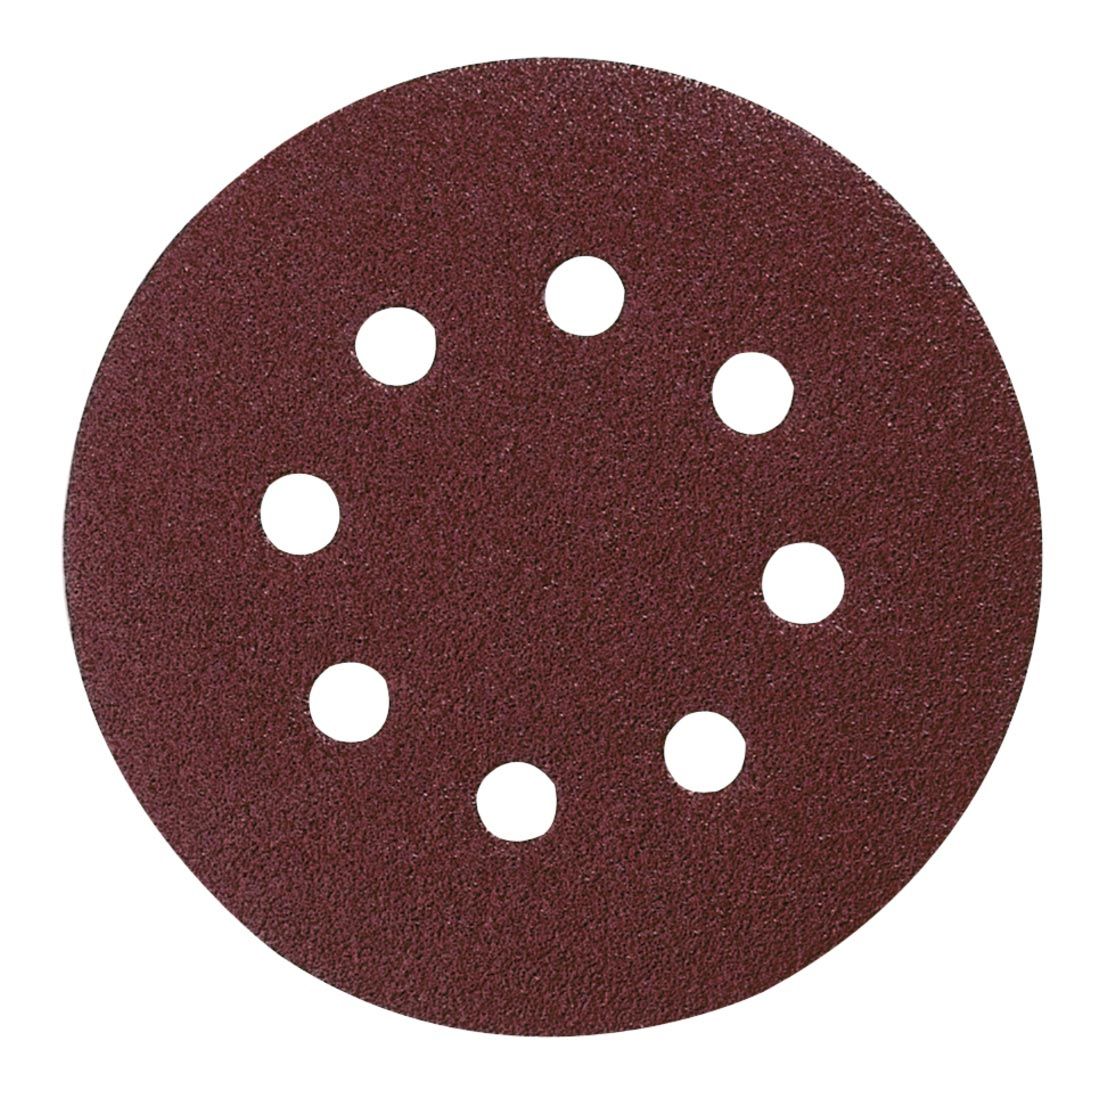 Makita P-43583 Abrasive Disc 125 Punched 180G - Pack of 10